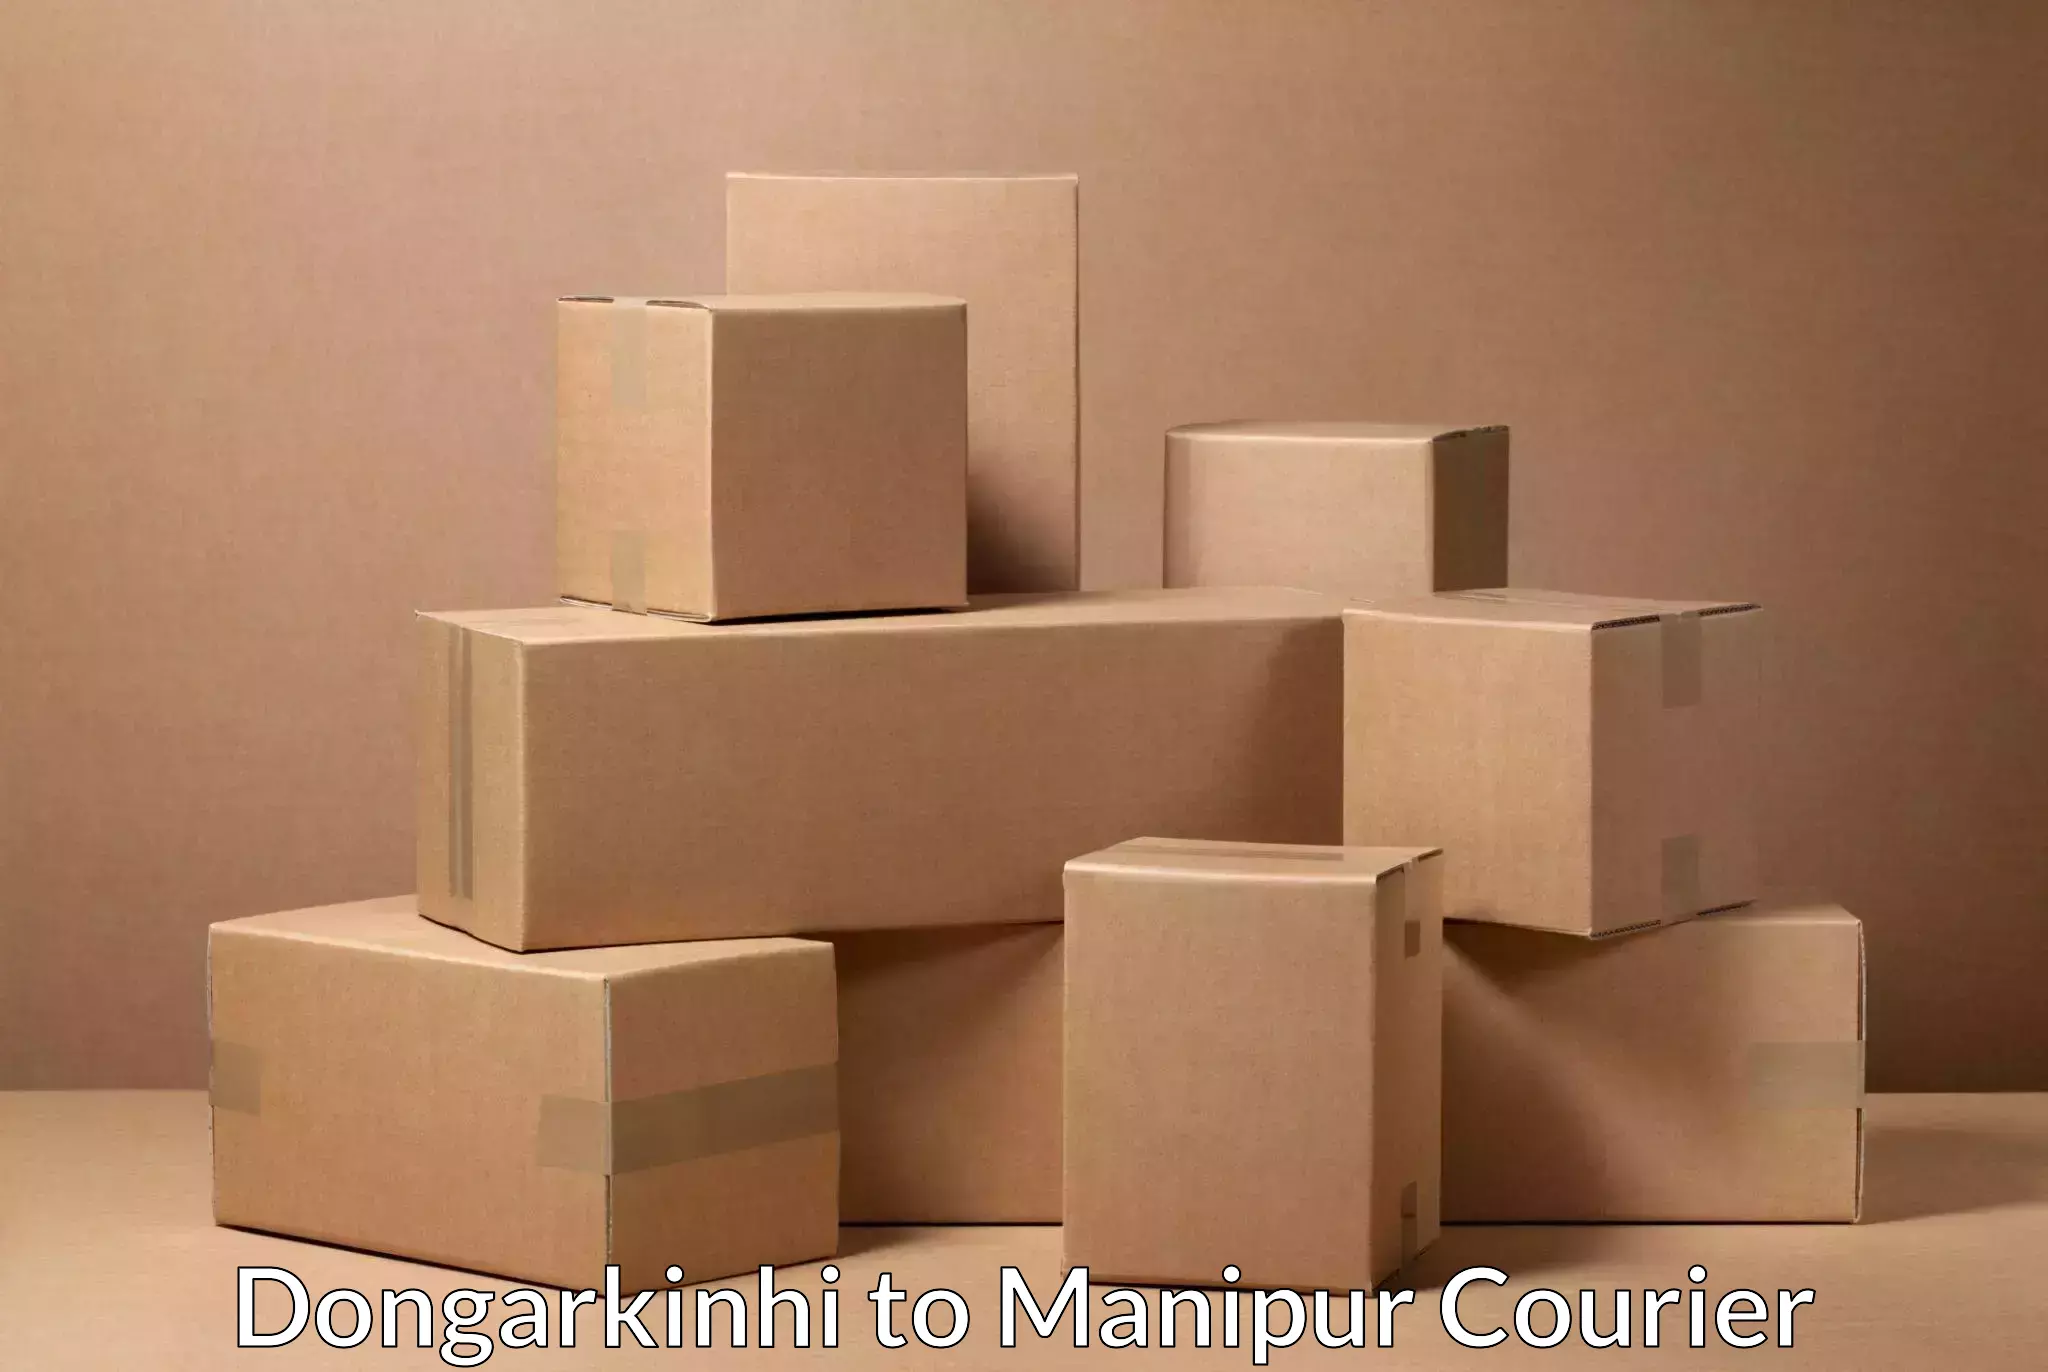 Efficient cargo services Dongarkinhi to Manipur